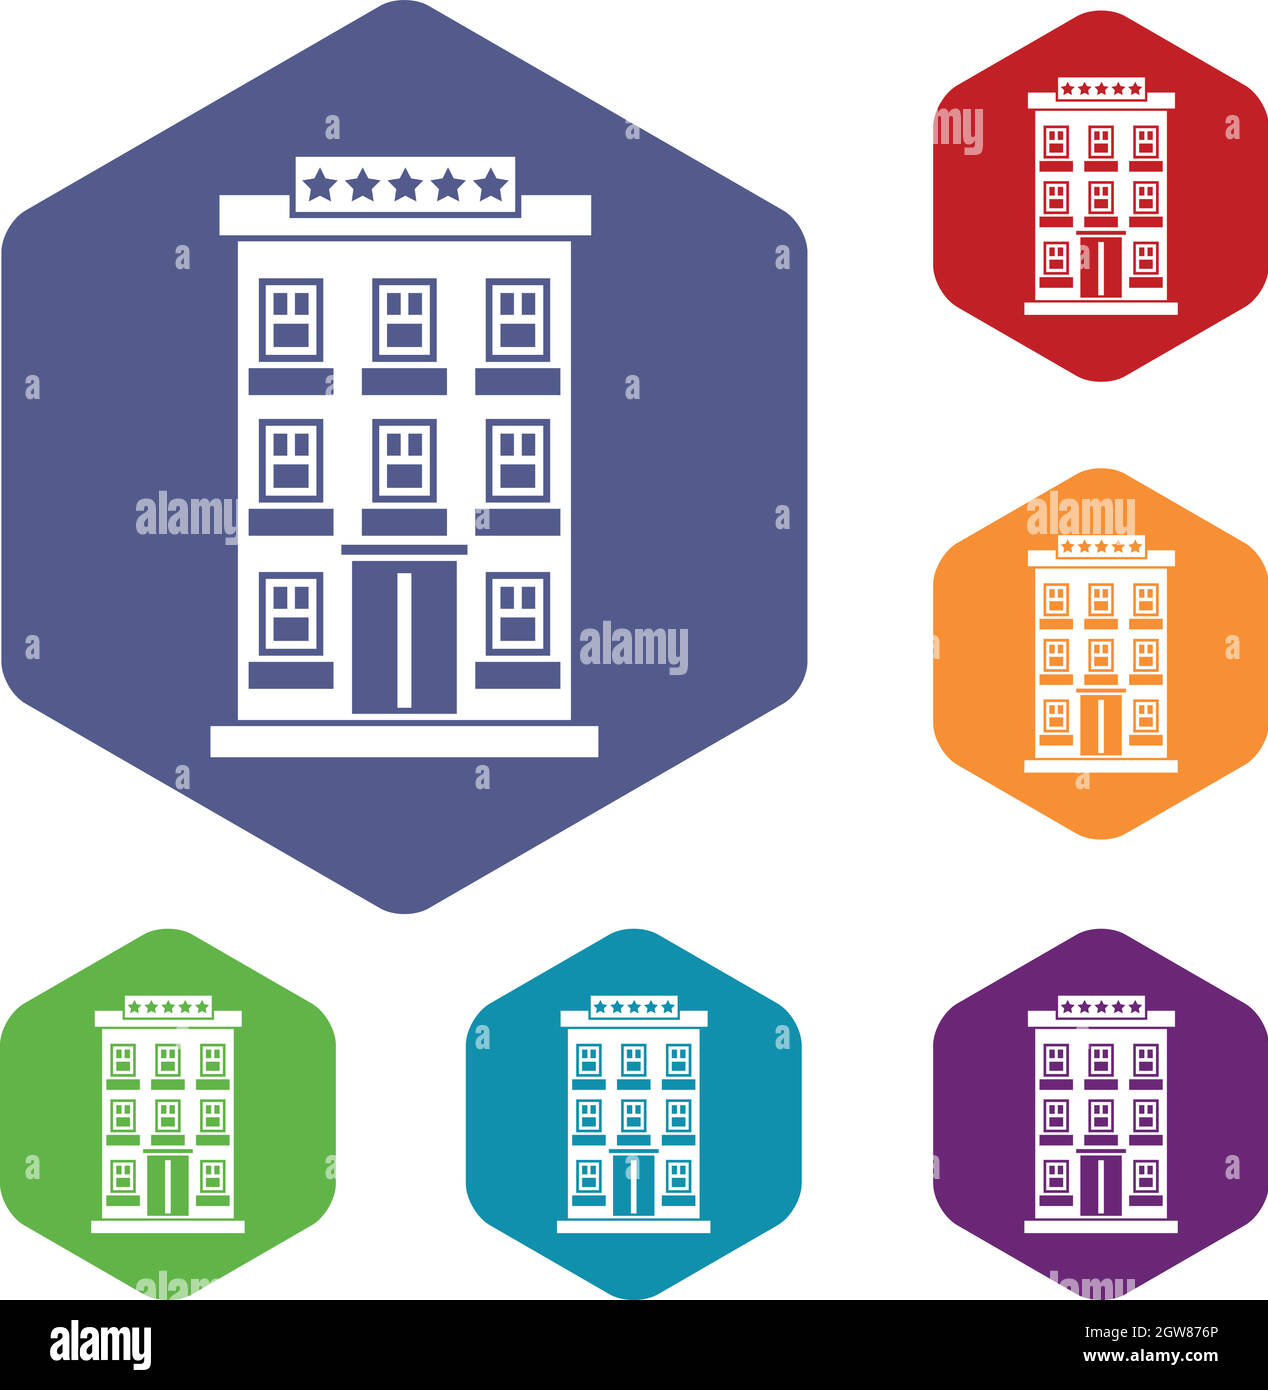 Hotel building icons set Stock Vector